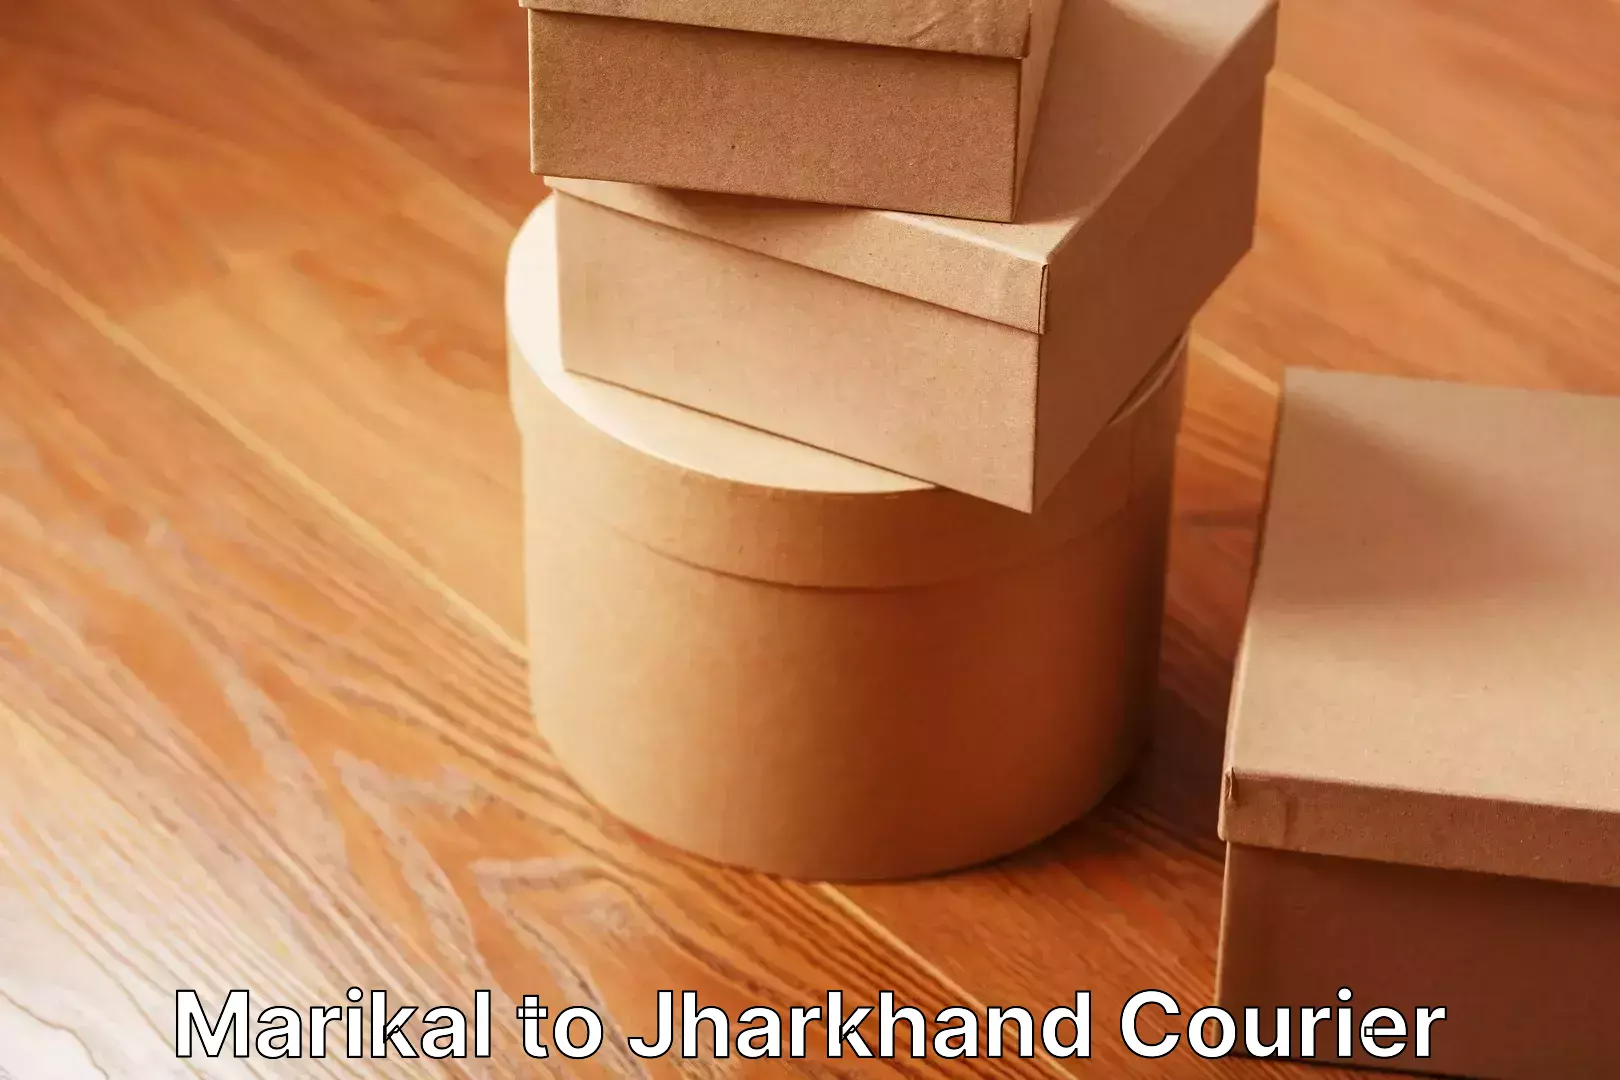 Moving and packing experts Marikal to Jharkhand